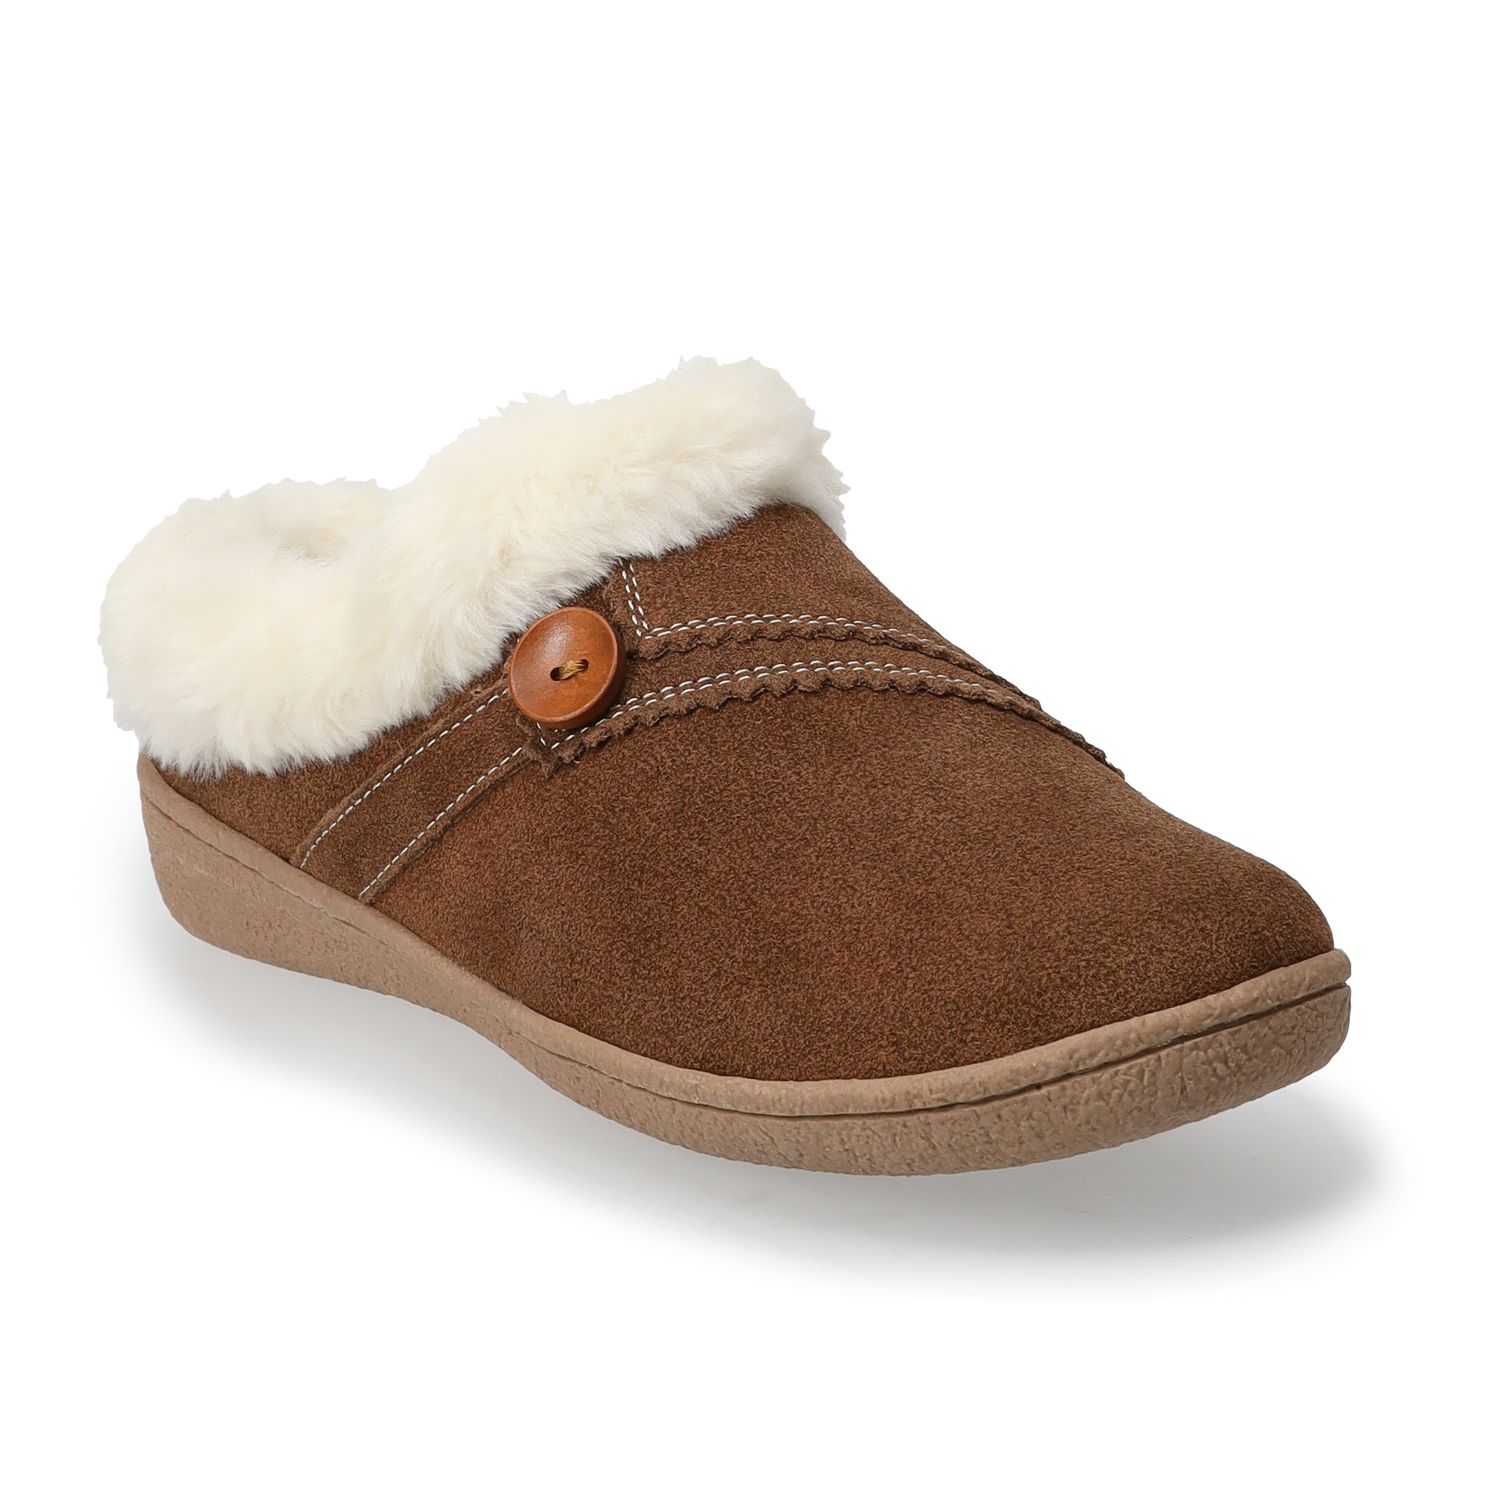 clarks sweater button clog slippers